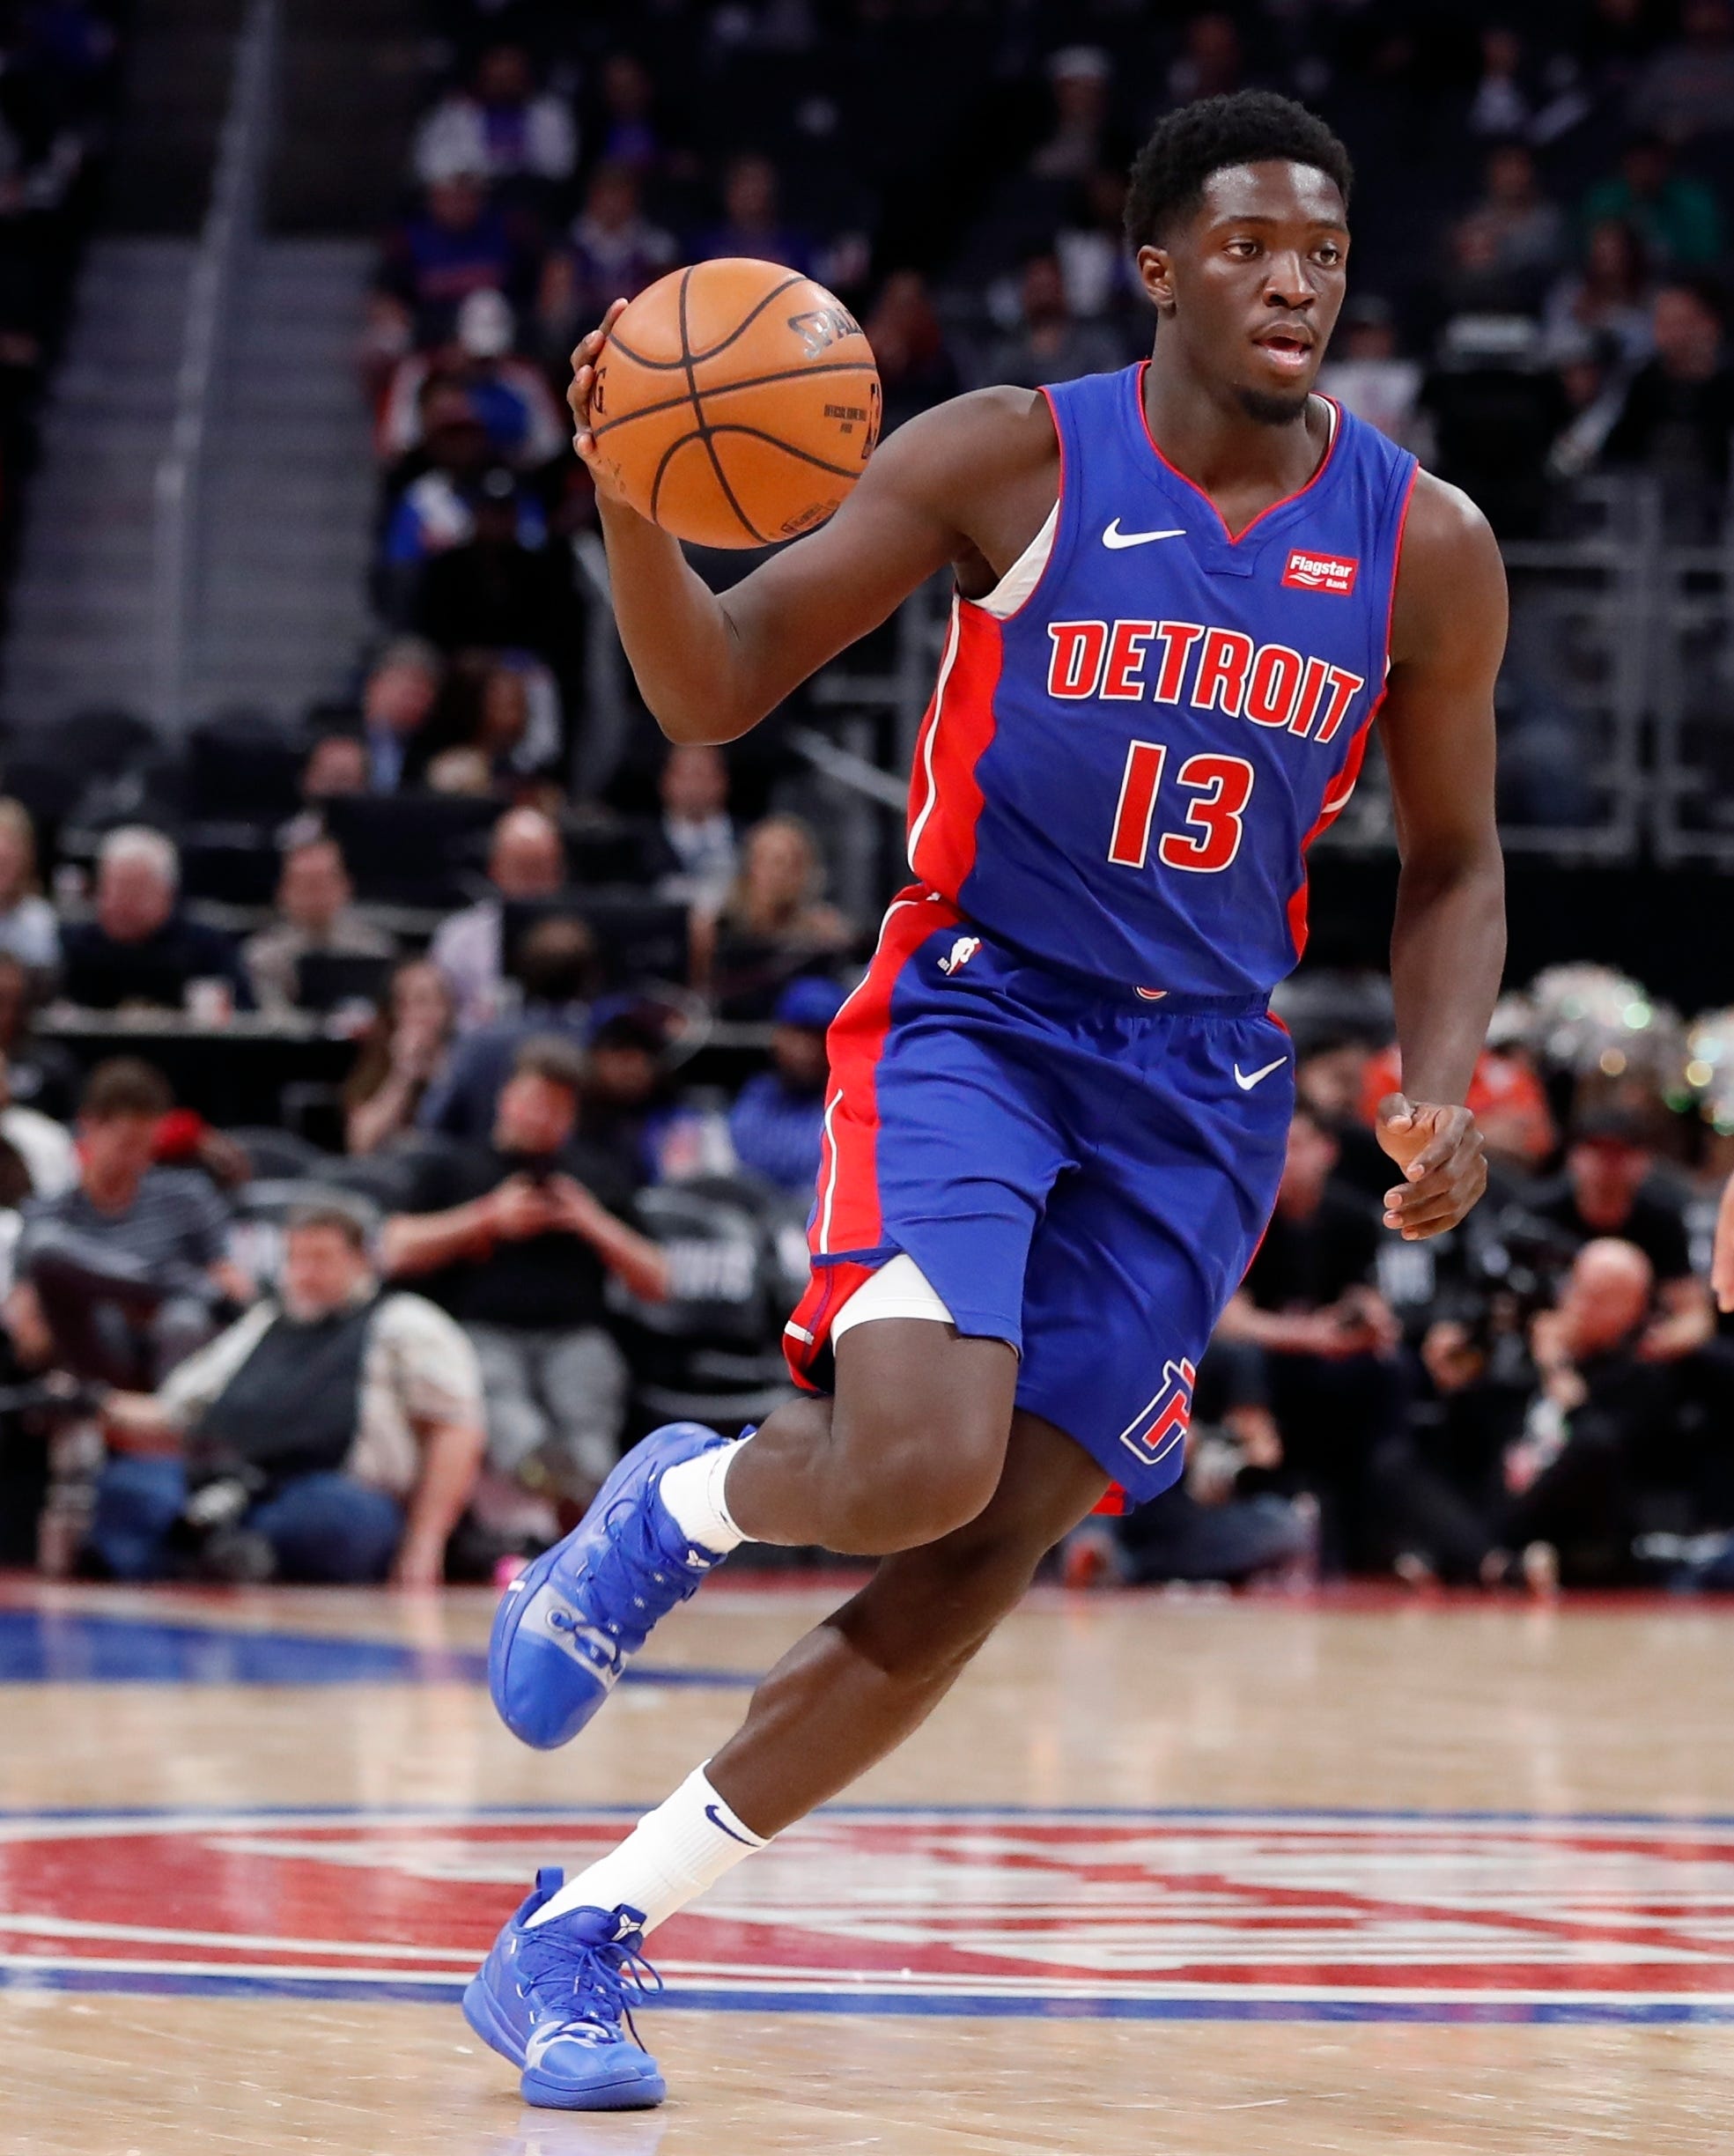 13. SG Khyri Thomas, age 23: Much like Svi Mykhailiuk, Thomas has had to wait patiently to get his turn for playing time in the regular season. He was good at the start of Summer League, and he’ll need to carry that same confidence and skill into training camp and the regular season. His second-round contract value is an asset and as he’s become a very good shooter and ball-handler; he could become a solid rotation player.